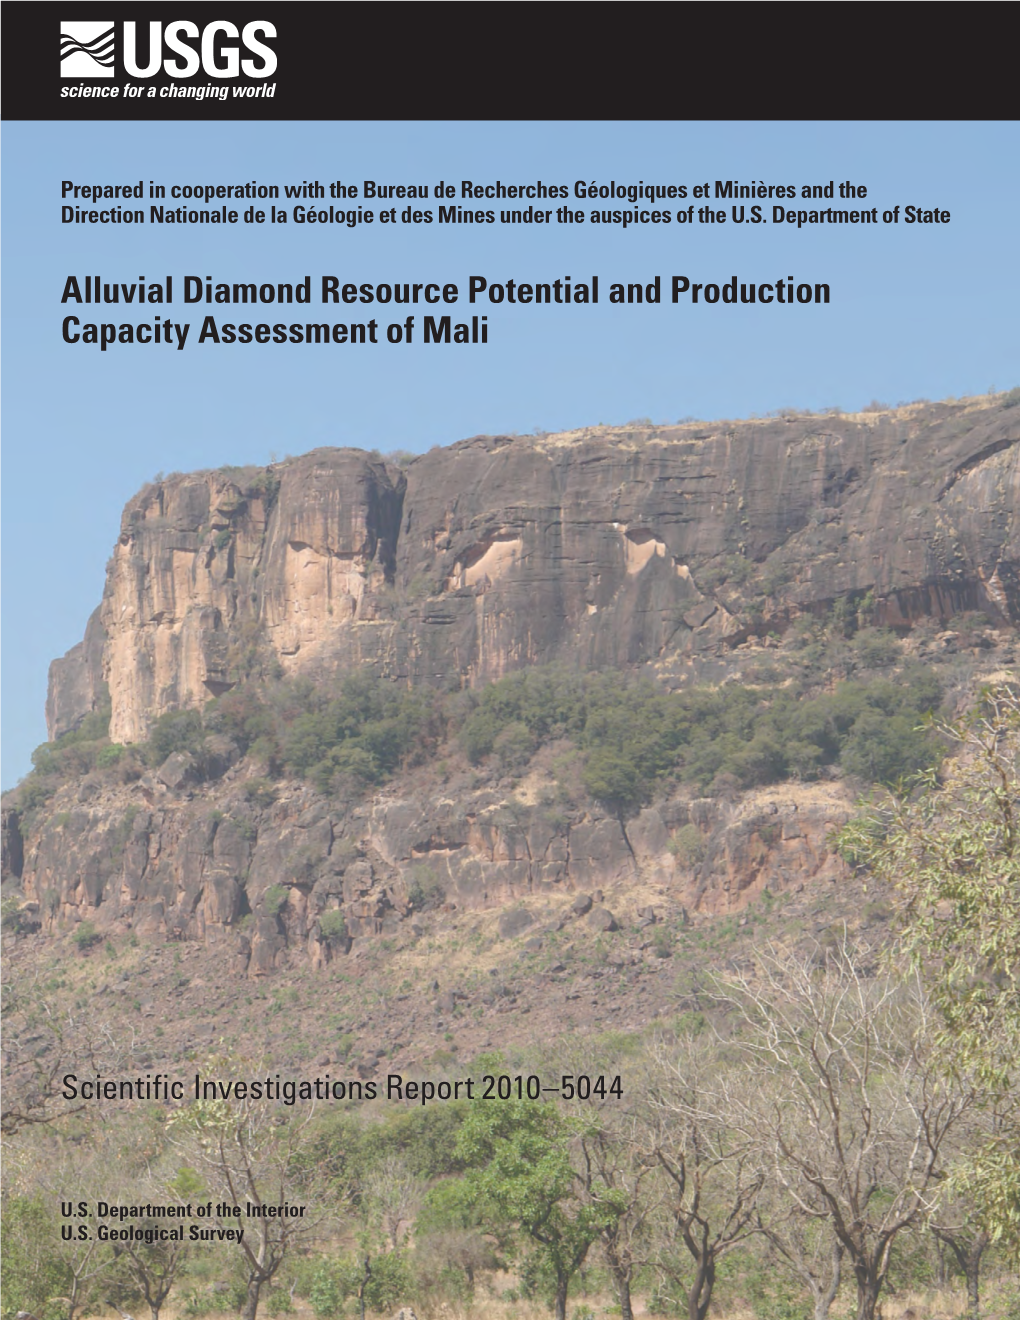 Alluvial Diamond Resource Potential and Production Capacity Assessment of Mali